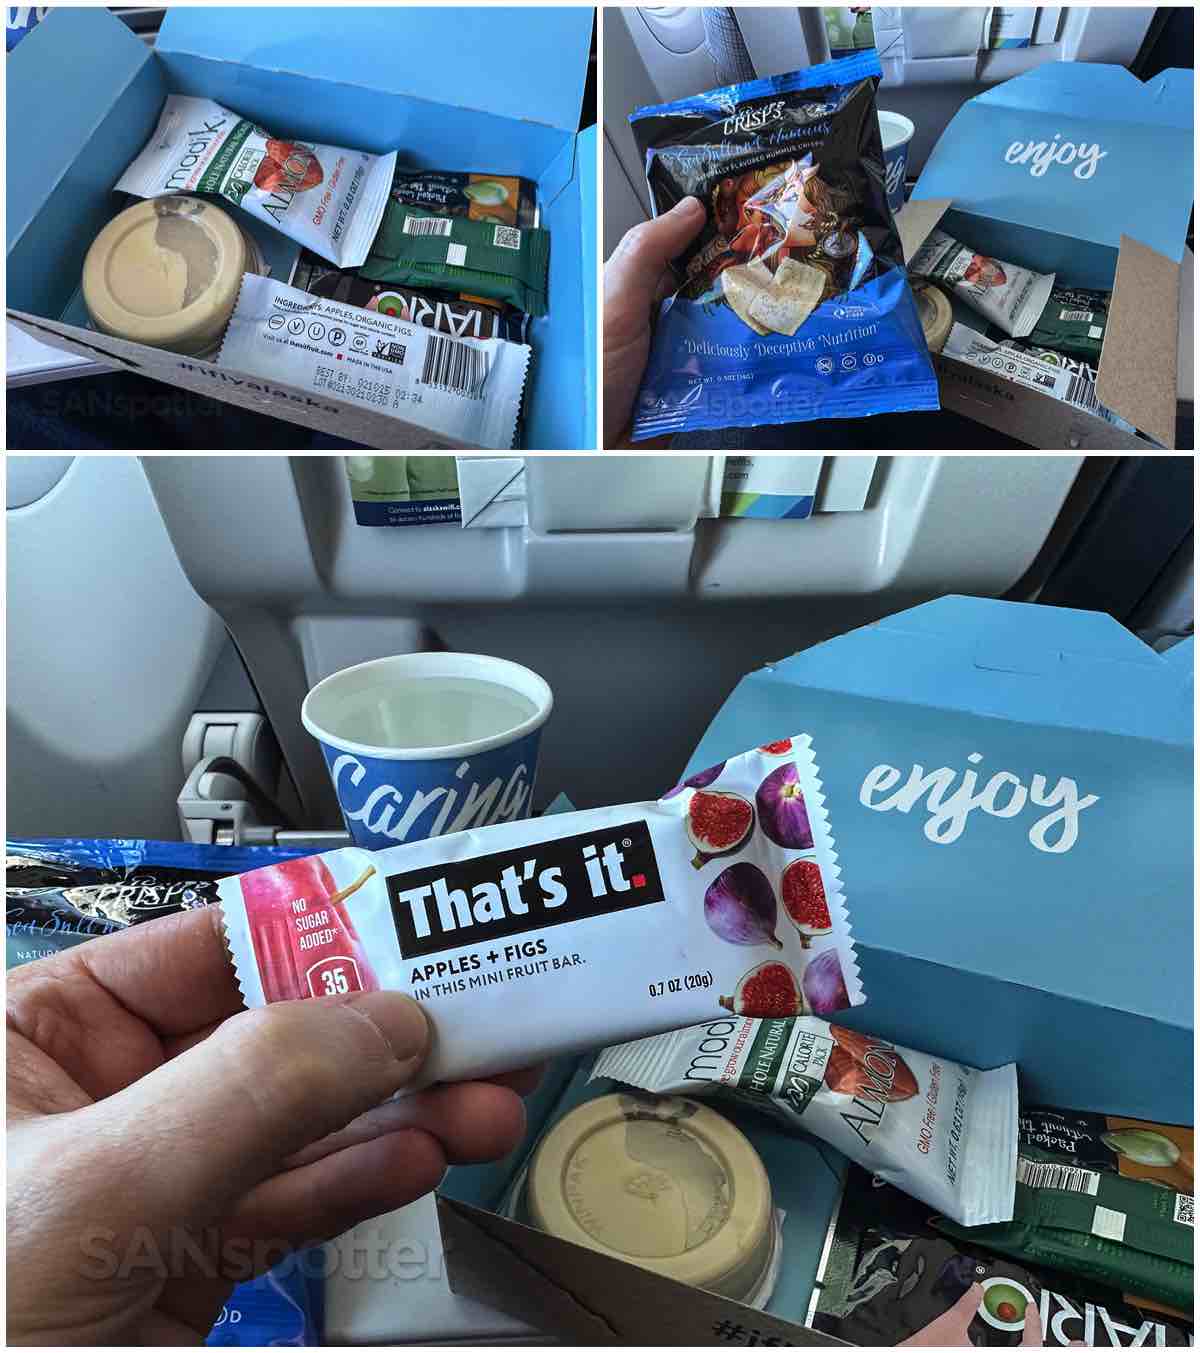 Contents of the Alaska Airlines Mediterranean Tapas Picnic Pack